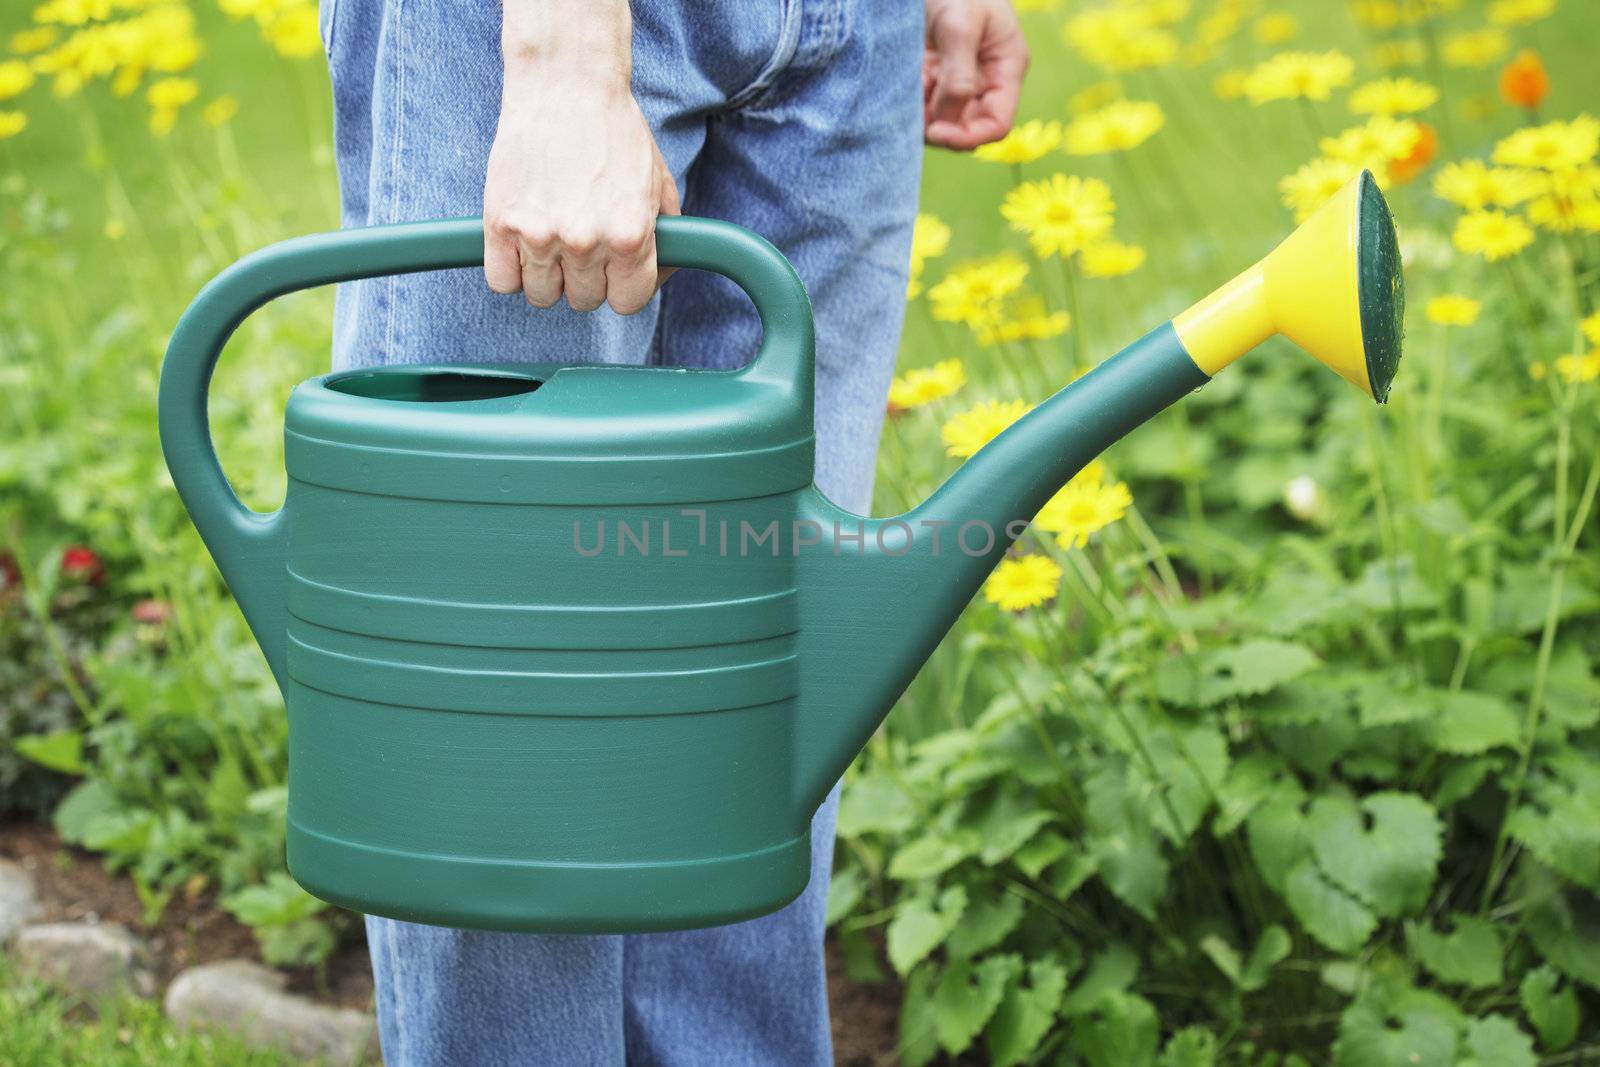 Watering can by Stocksnapper